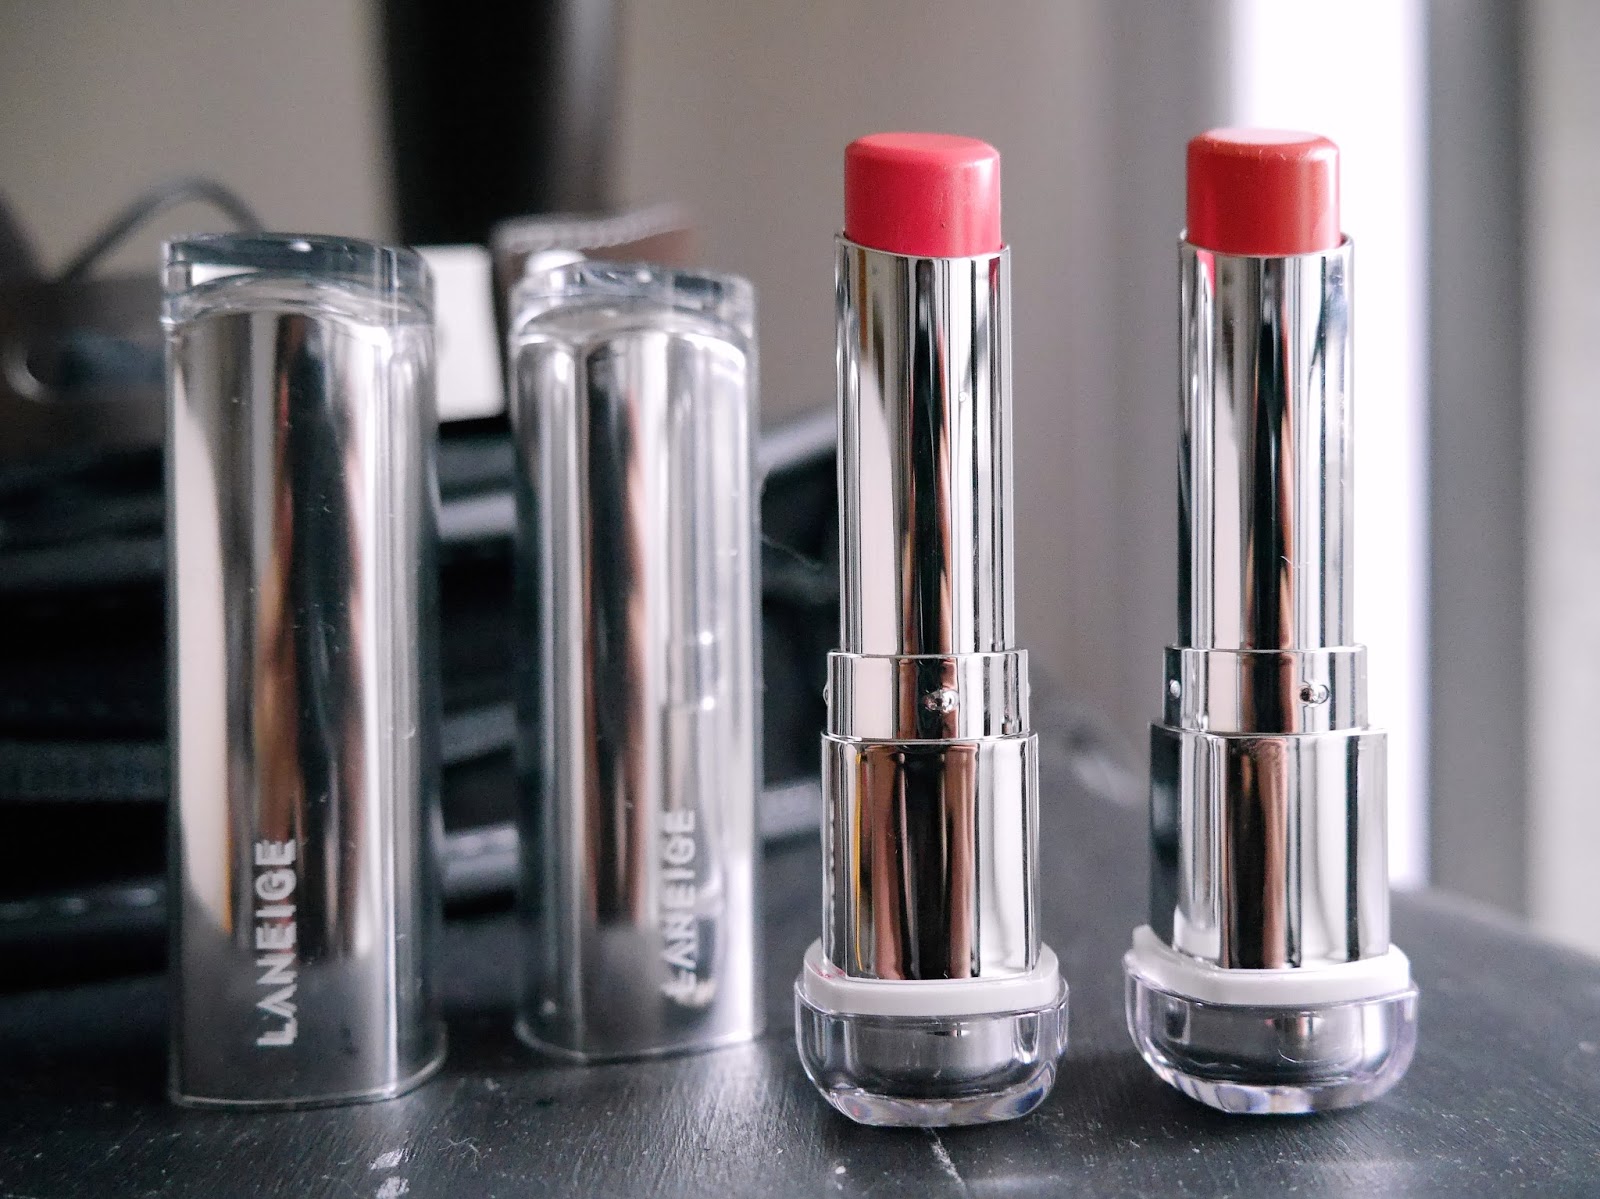 laneige serum intense lipstick twinkle coral flash pink swatch review